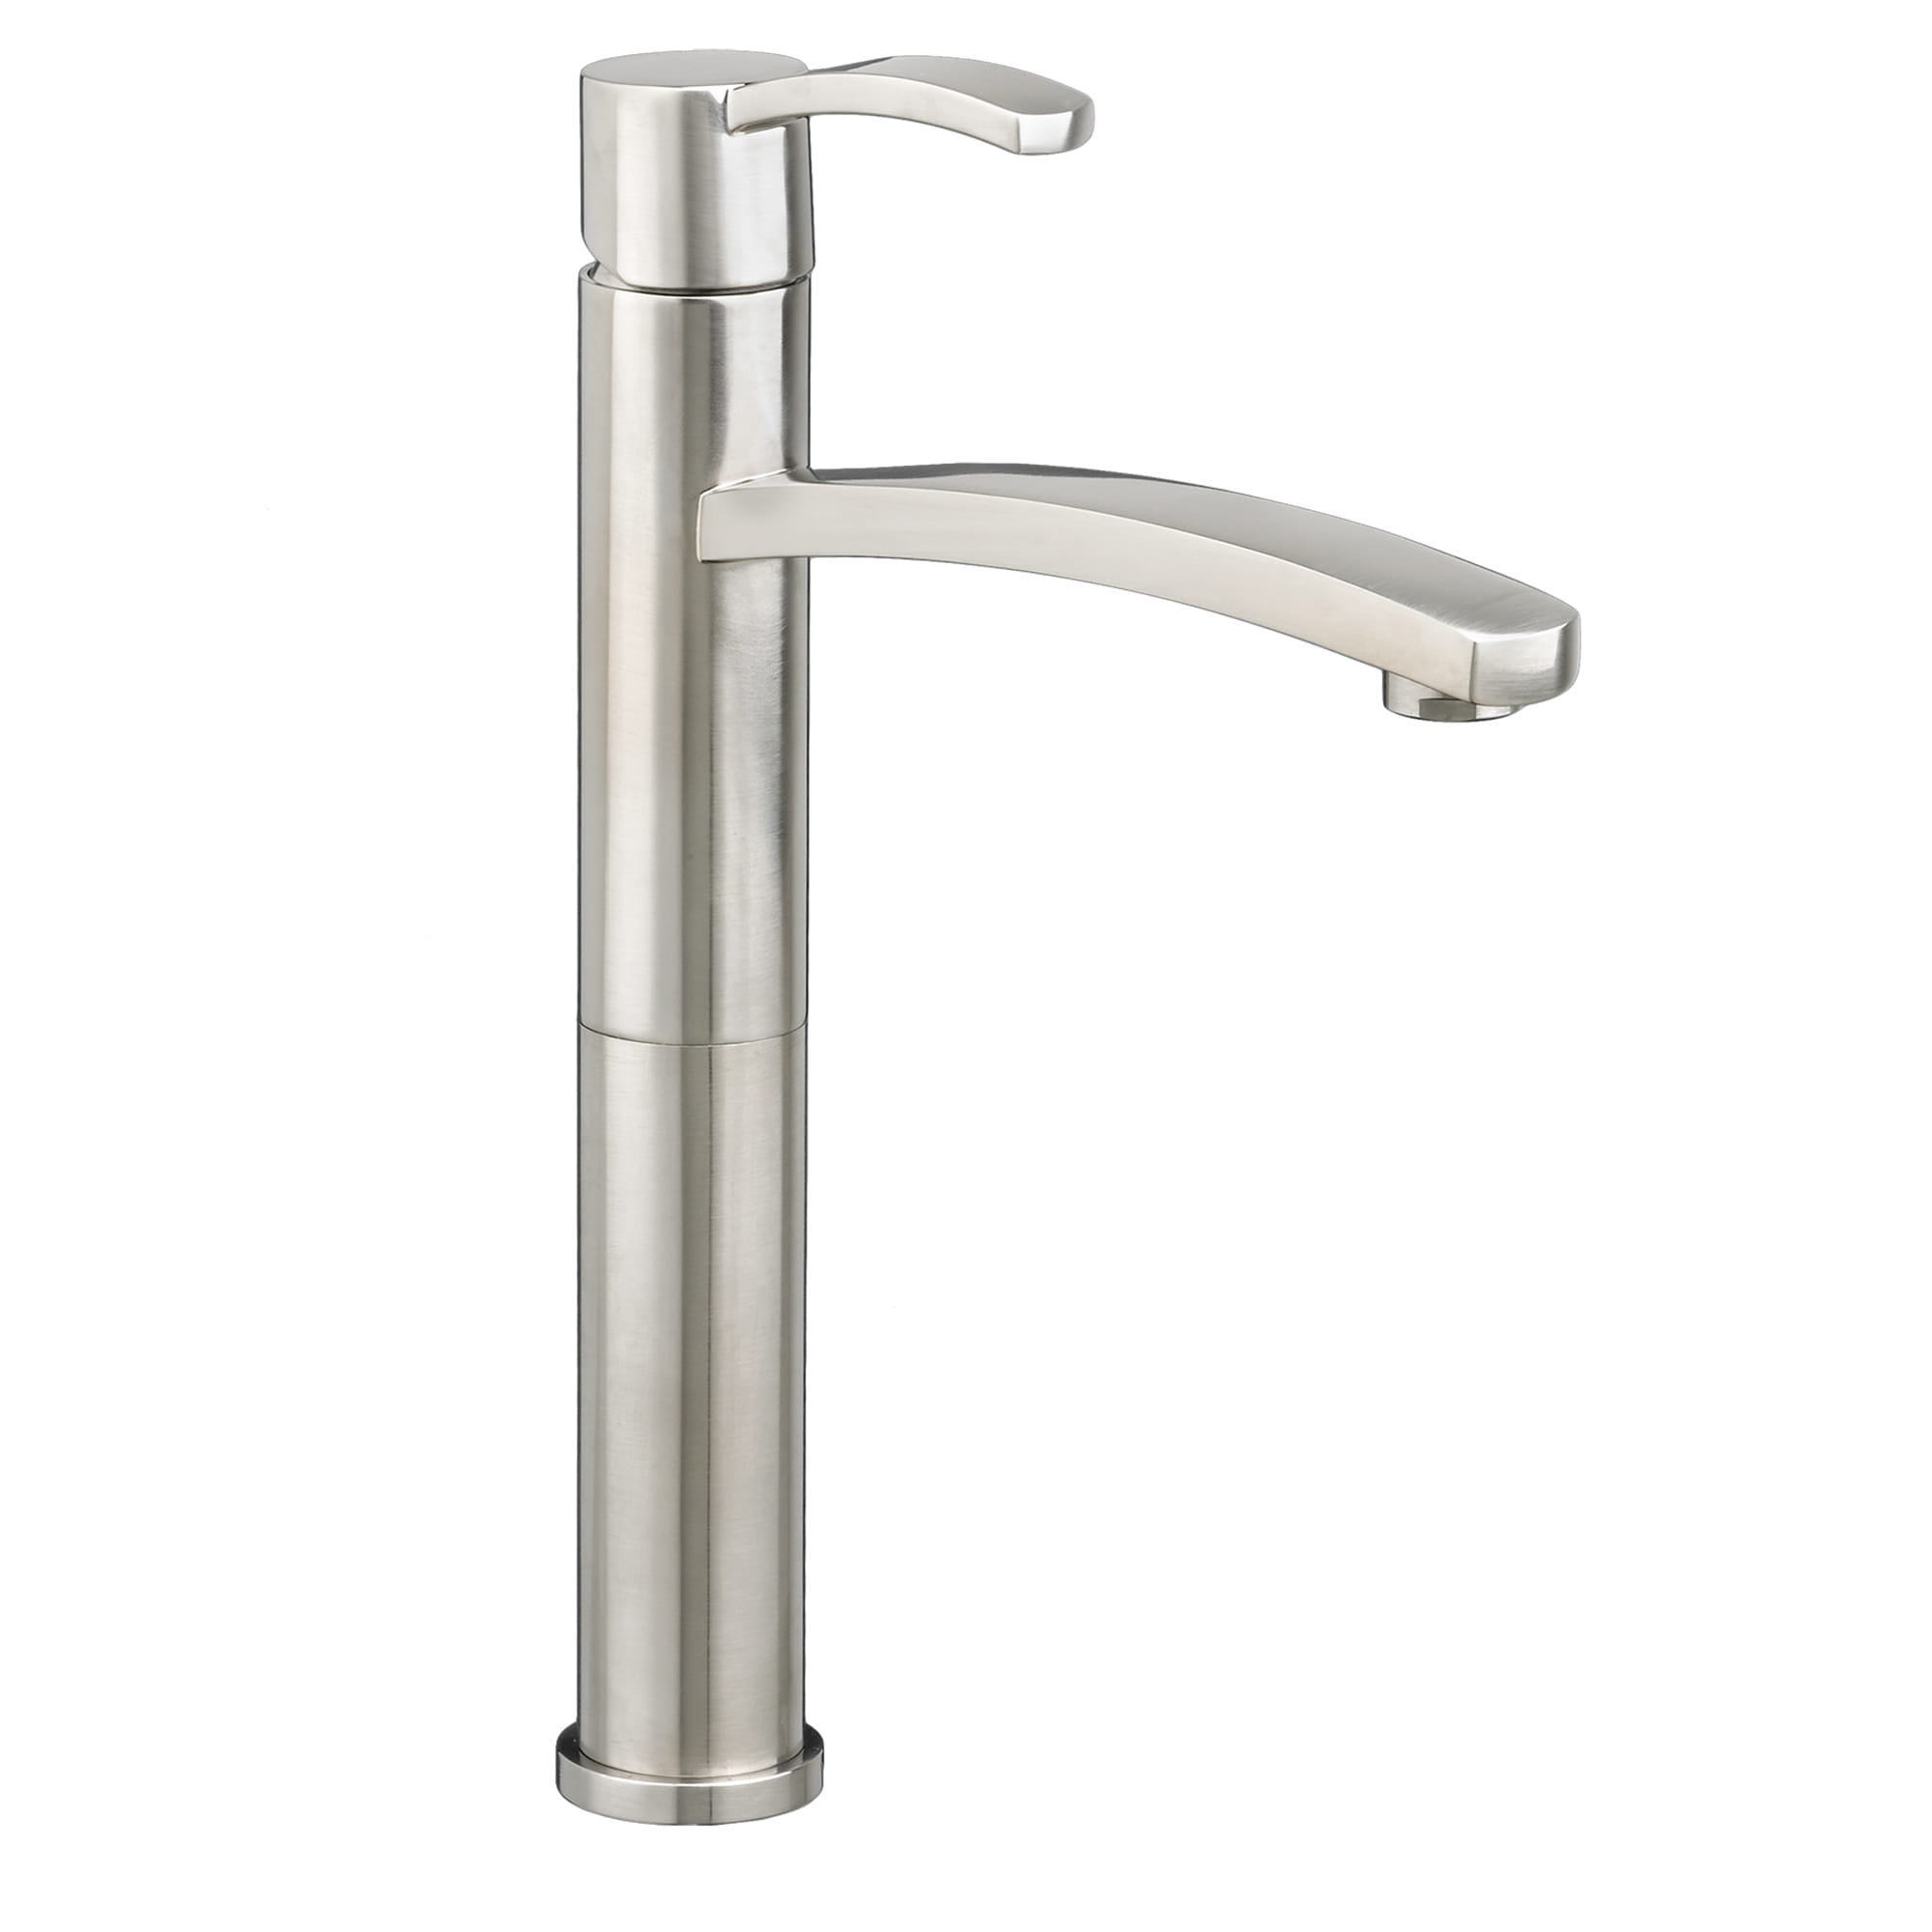 Berwick Single Hole Single Handle Bathroom Faucet 12 gpm 45 L min With Lever Handle   BRUSHED NICKEL